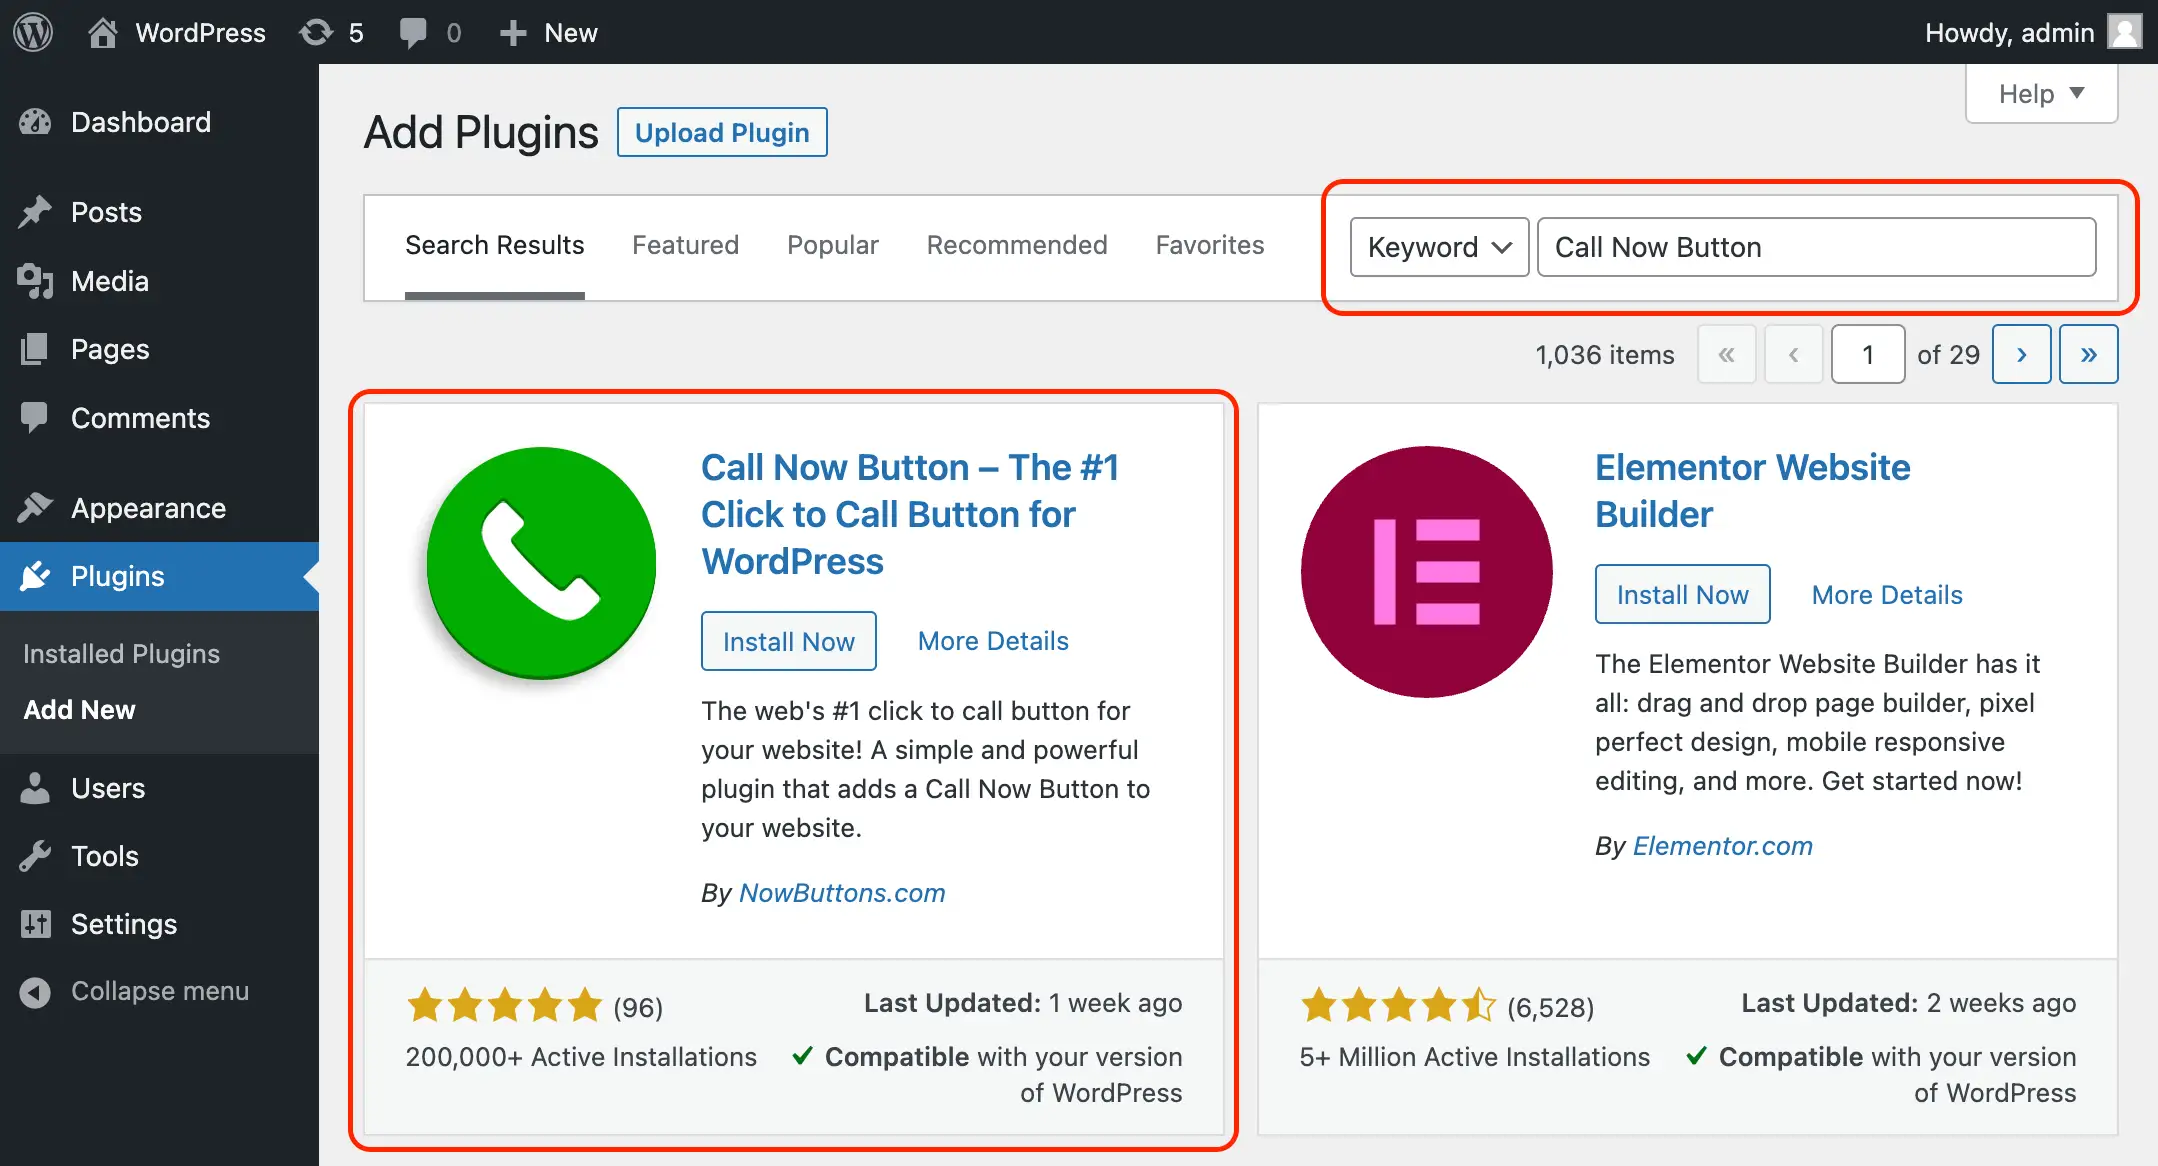 Add a click to call button to your website in WordPress